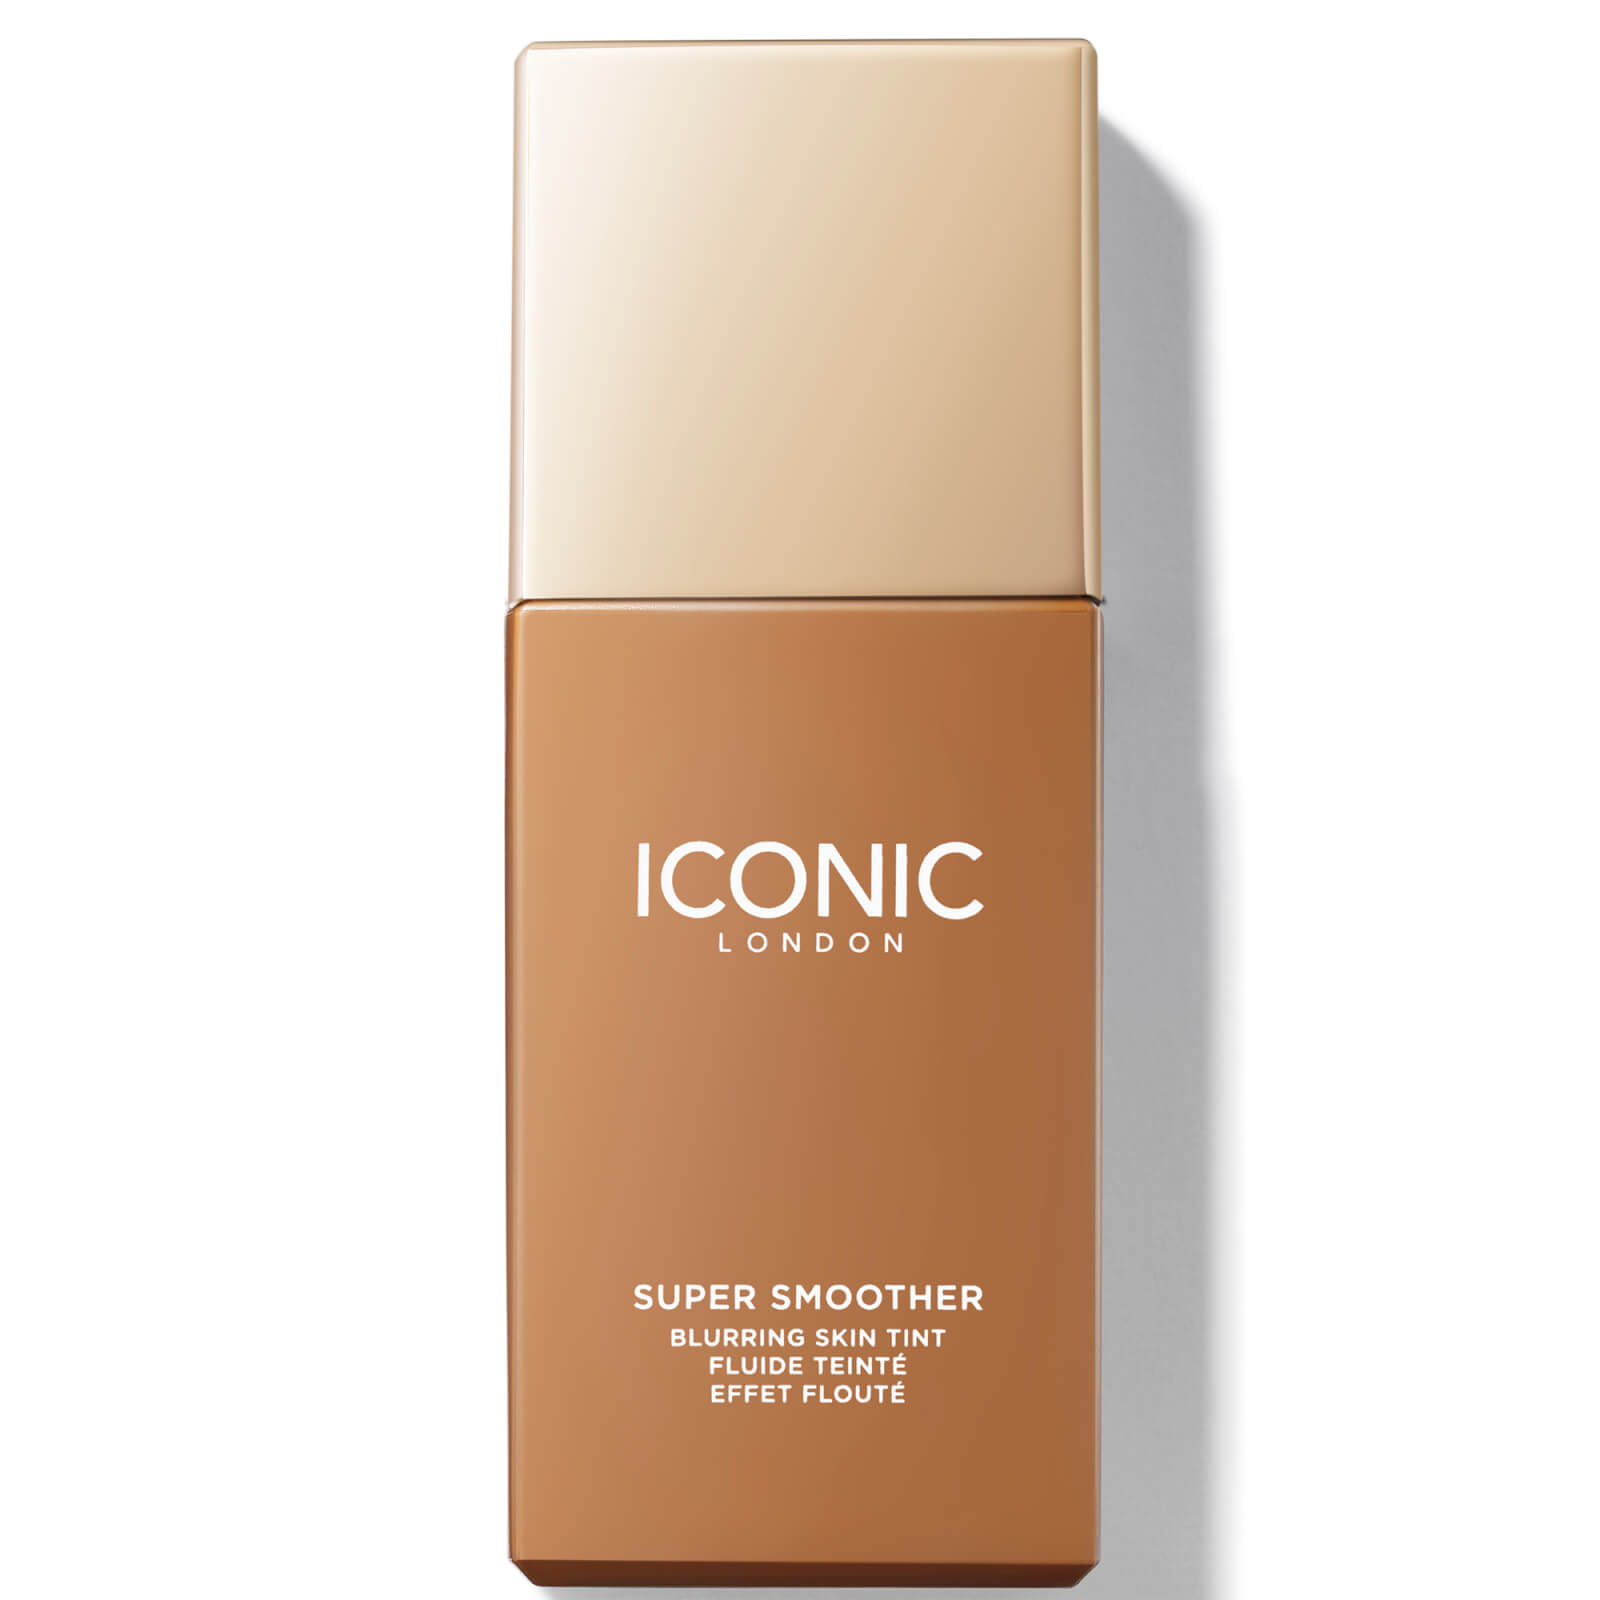 ICONIC London Super Smoother Blurring Skin Tint 30ml (Various Shades) - Neutral Tan